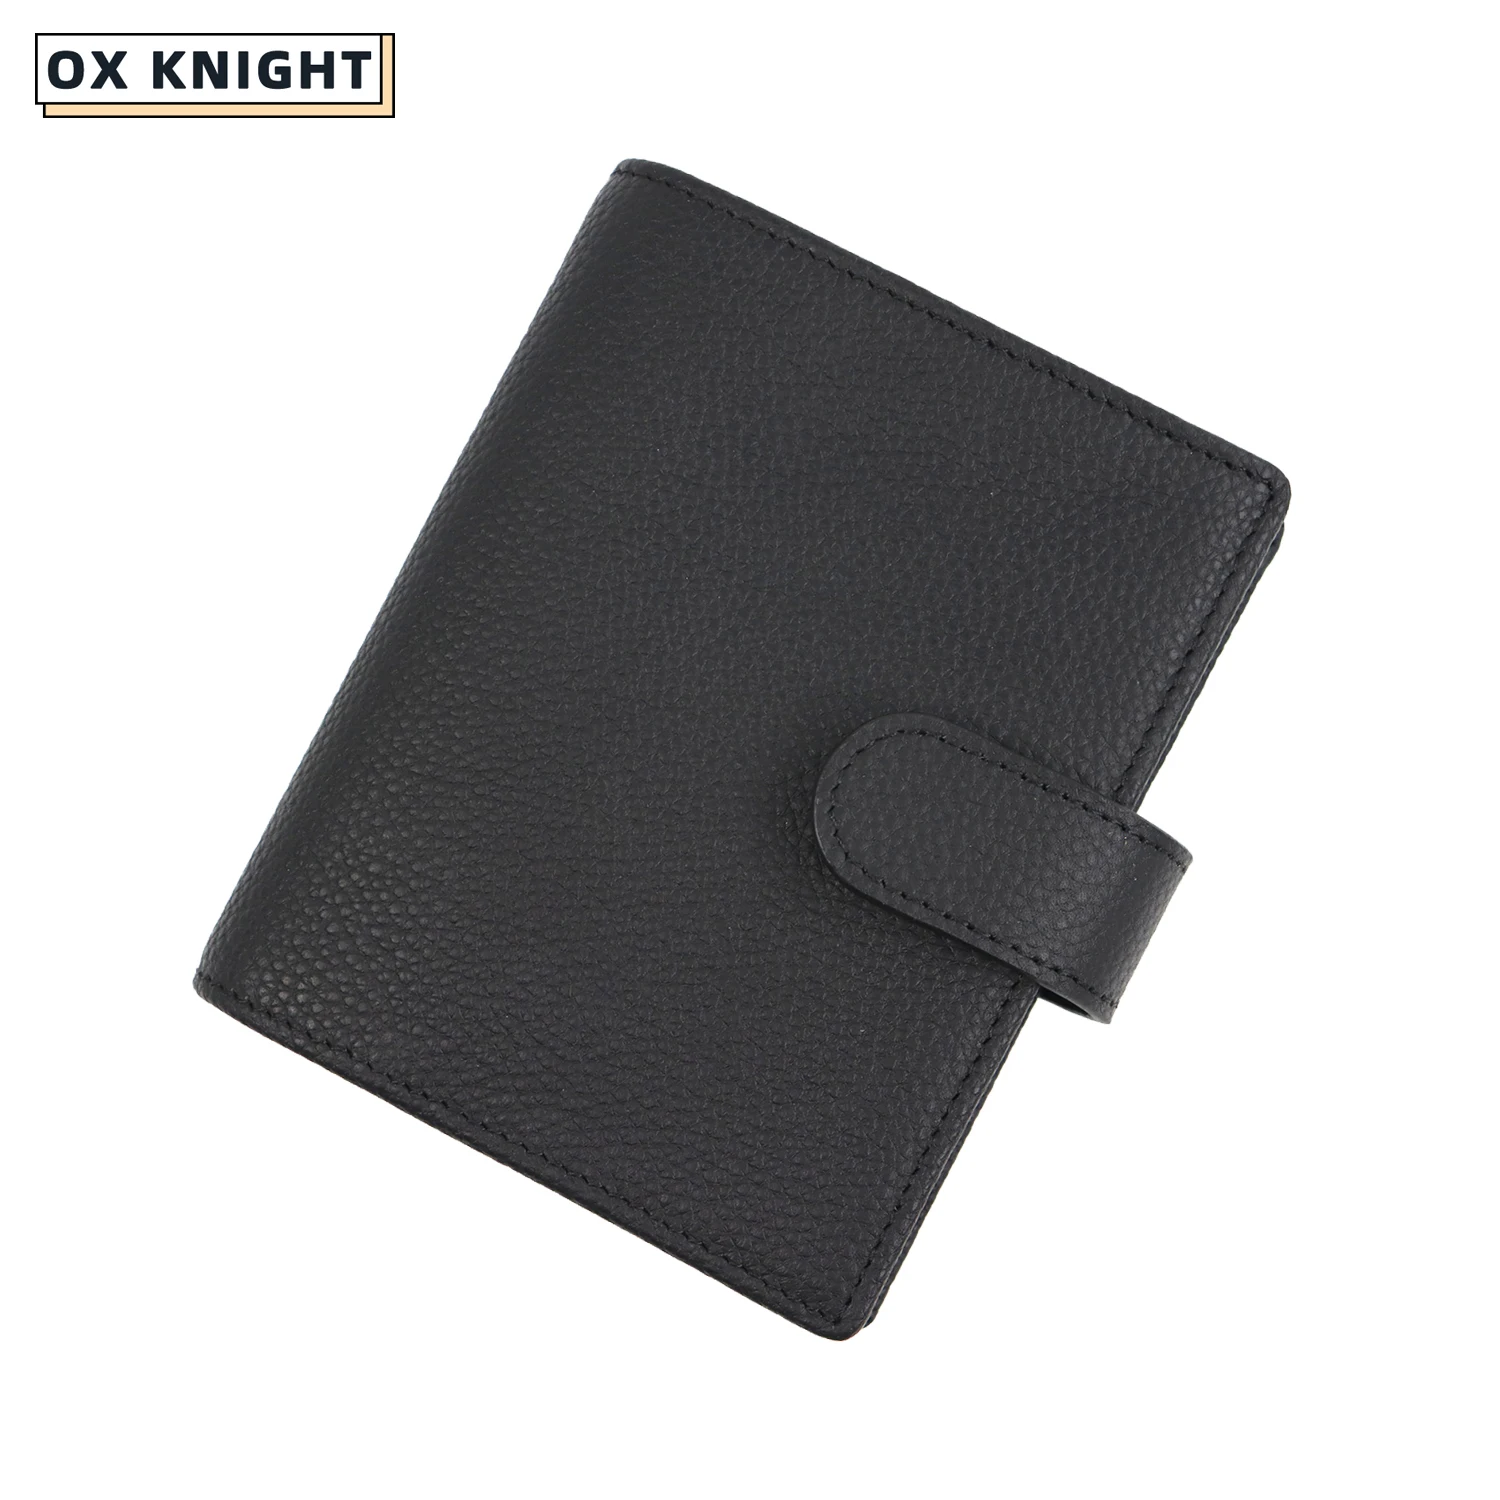 OX KNIGHT 100% Genuine Leather Notebook A8 Size Rings Planner Pebbled Grain Cowhide Wallet Multifunctional Journal Notepad